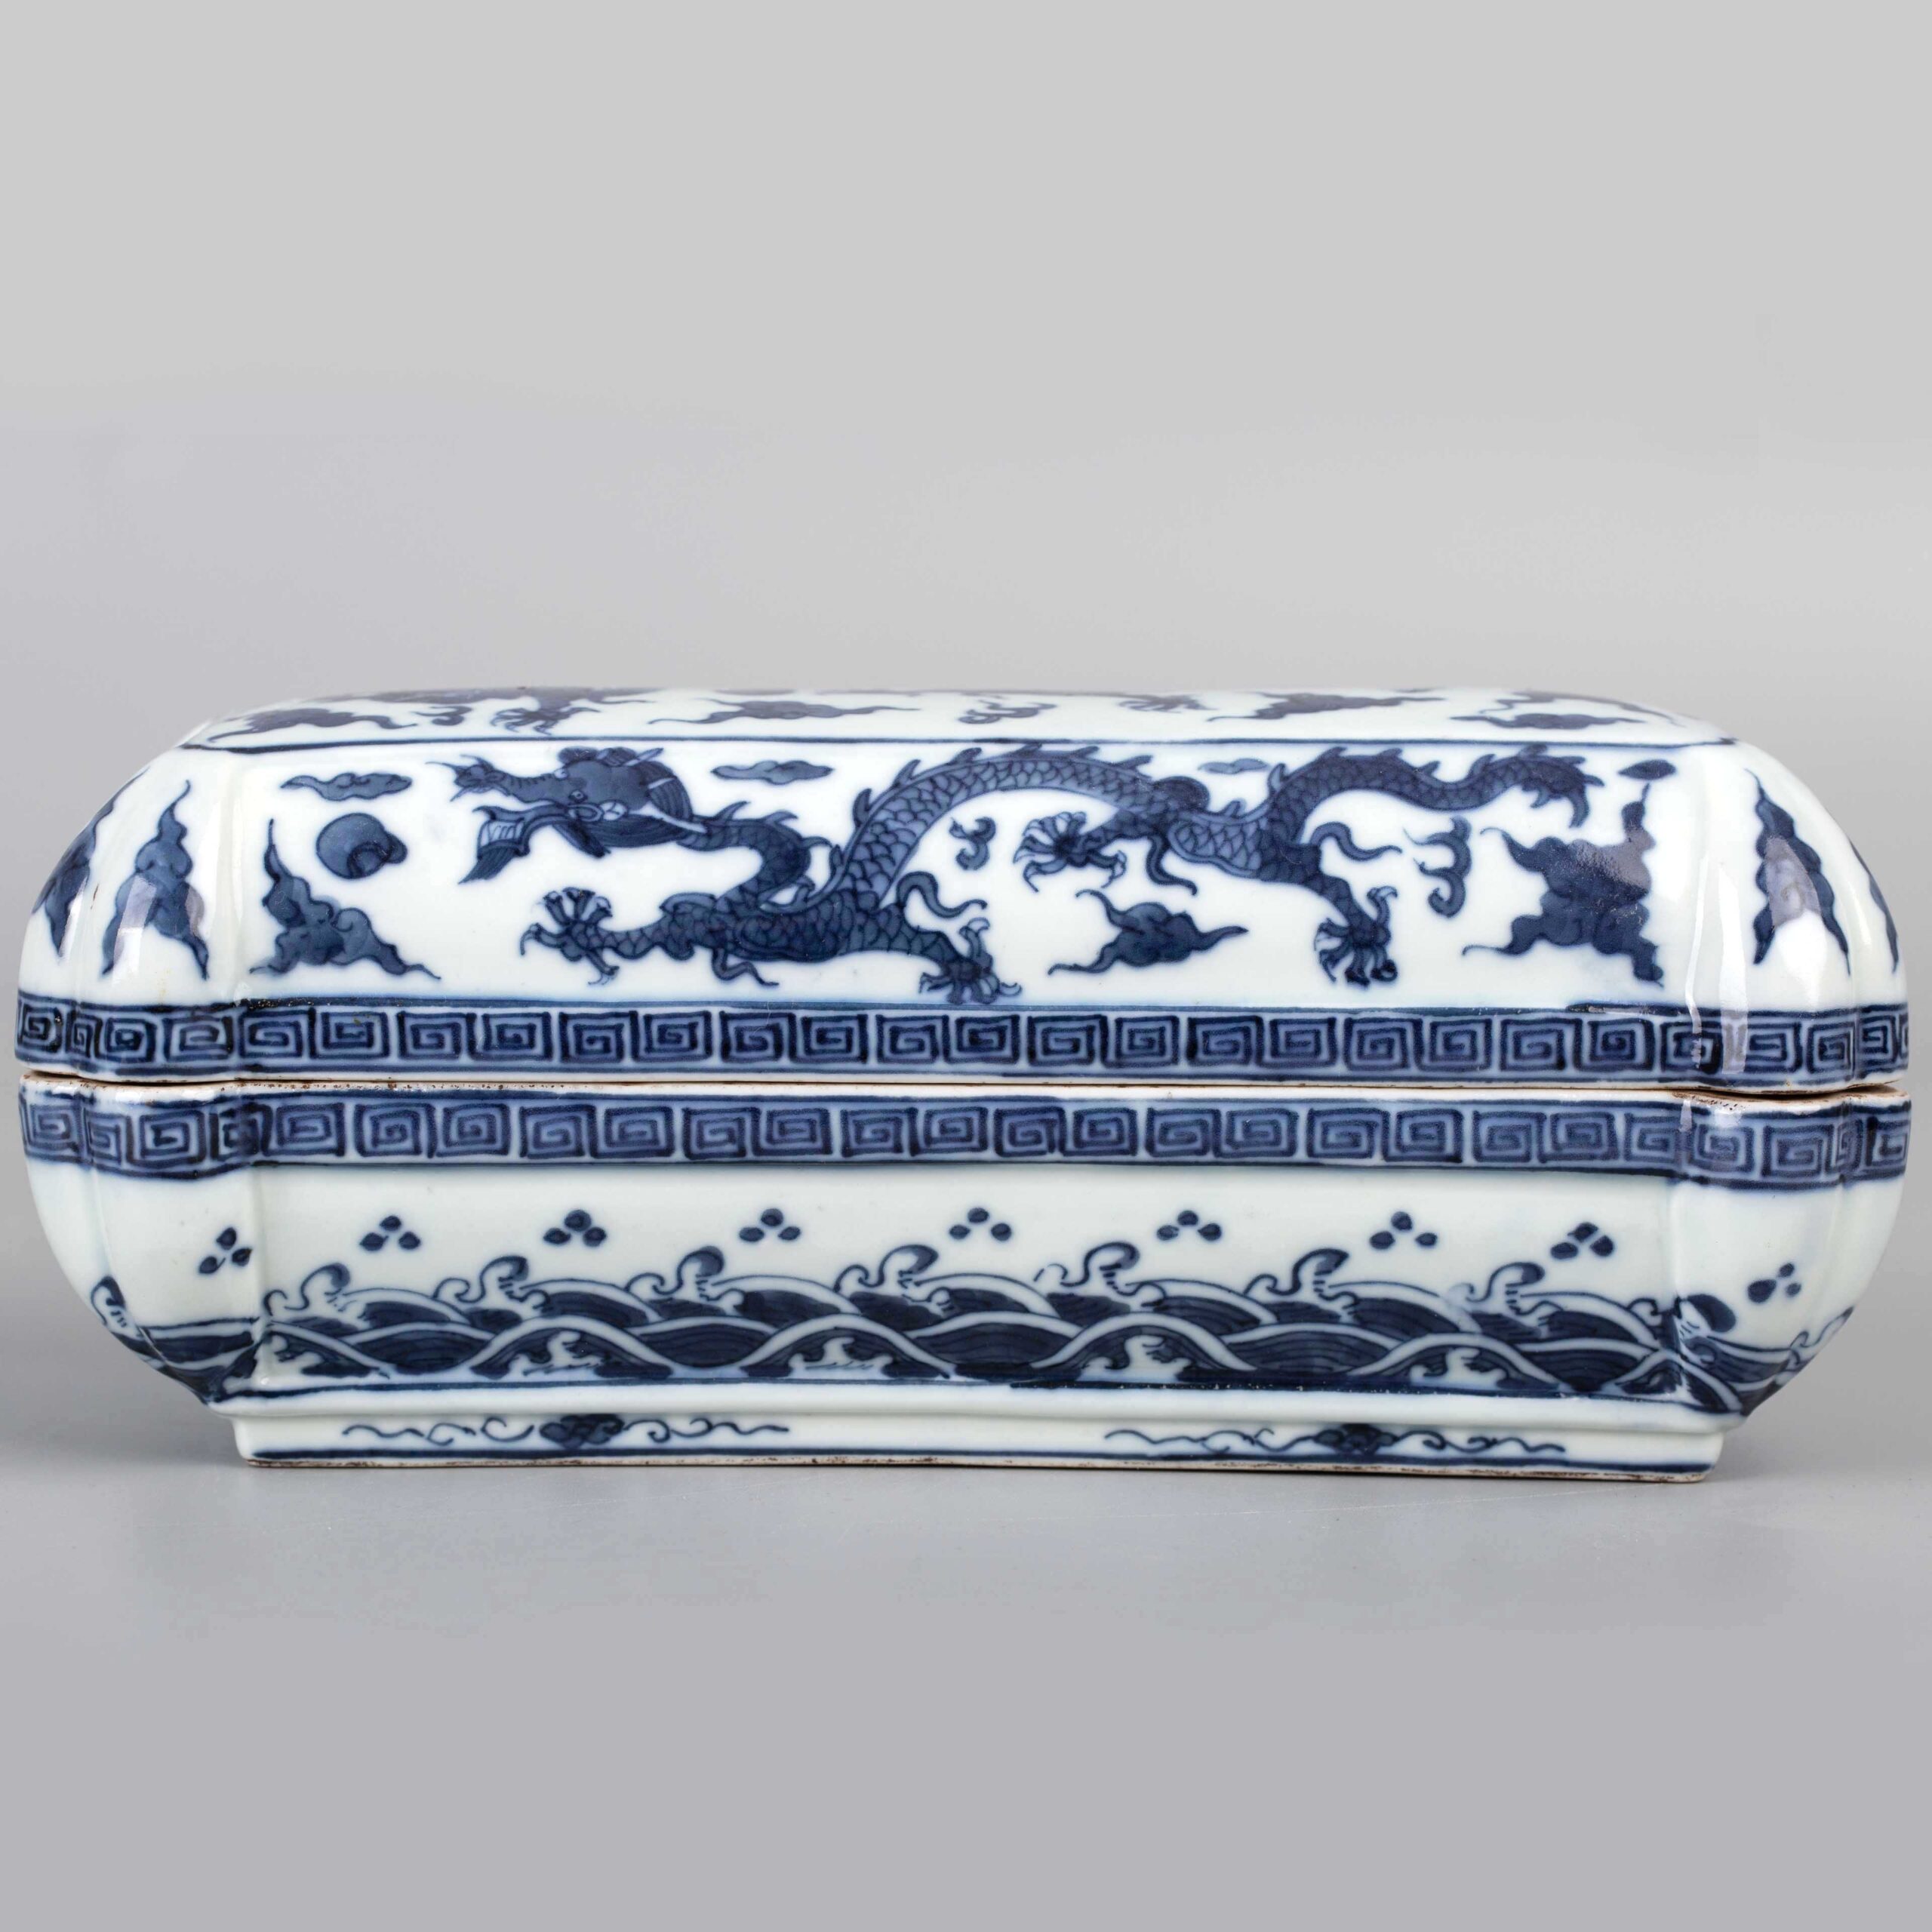 Blue and white dragon pattern lid box with Daming Wanli Year